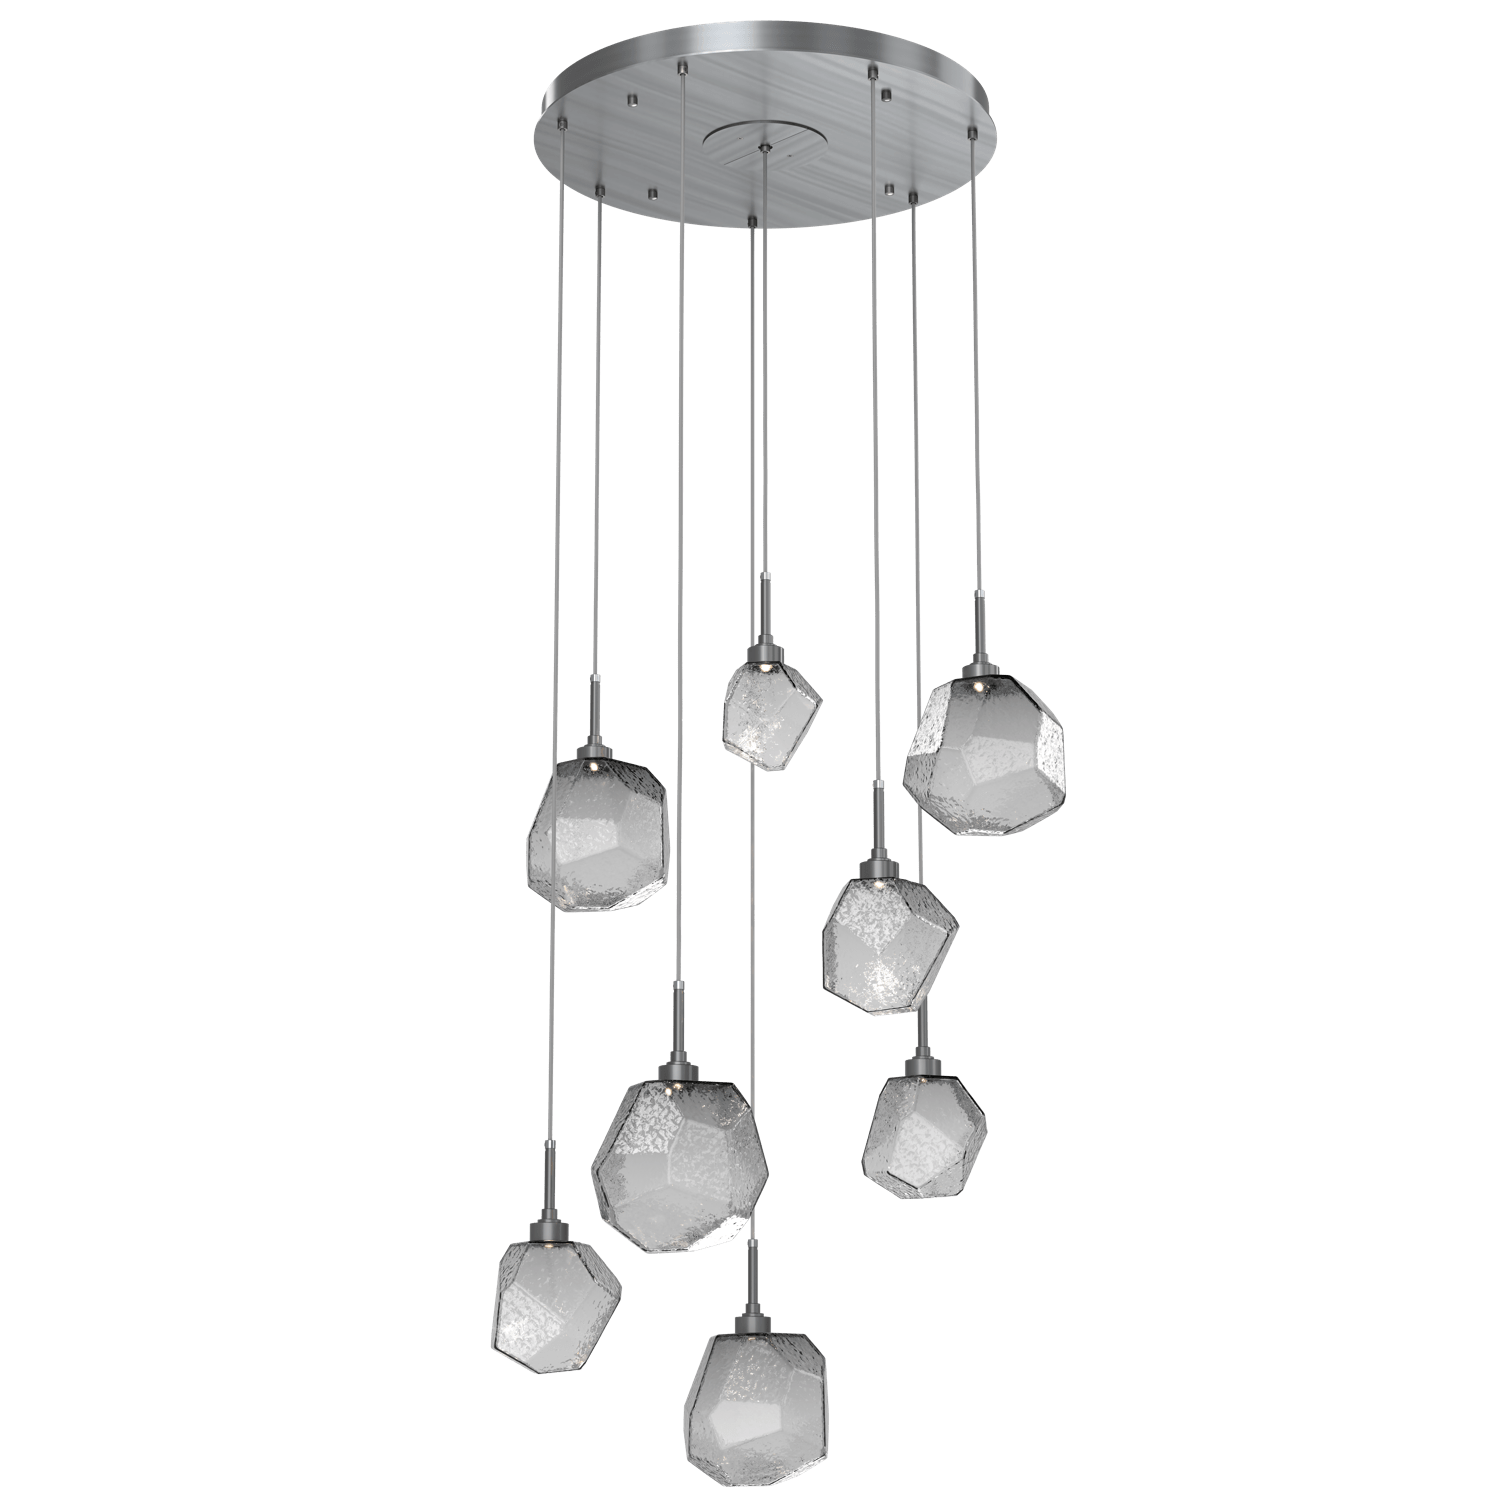 CHB0039-08-GM-S-Hammerton-Studio-Gem-8-light-round-pendant-chandelier-with-gunmetal-finish-and-smoke-blown-glass-shades-and-LED-lamping